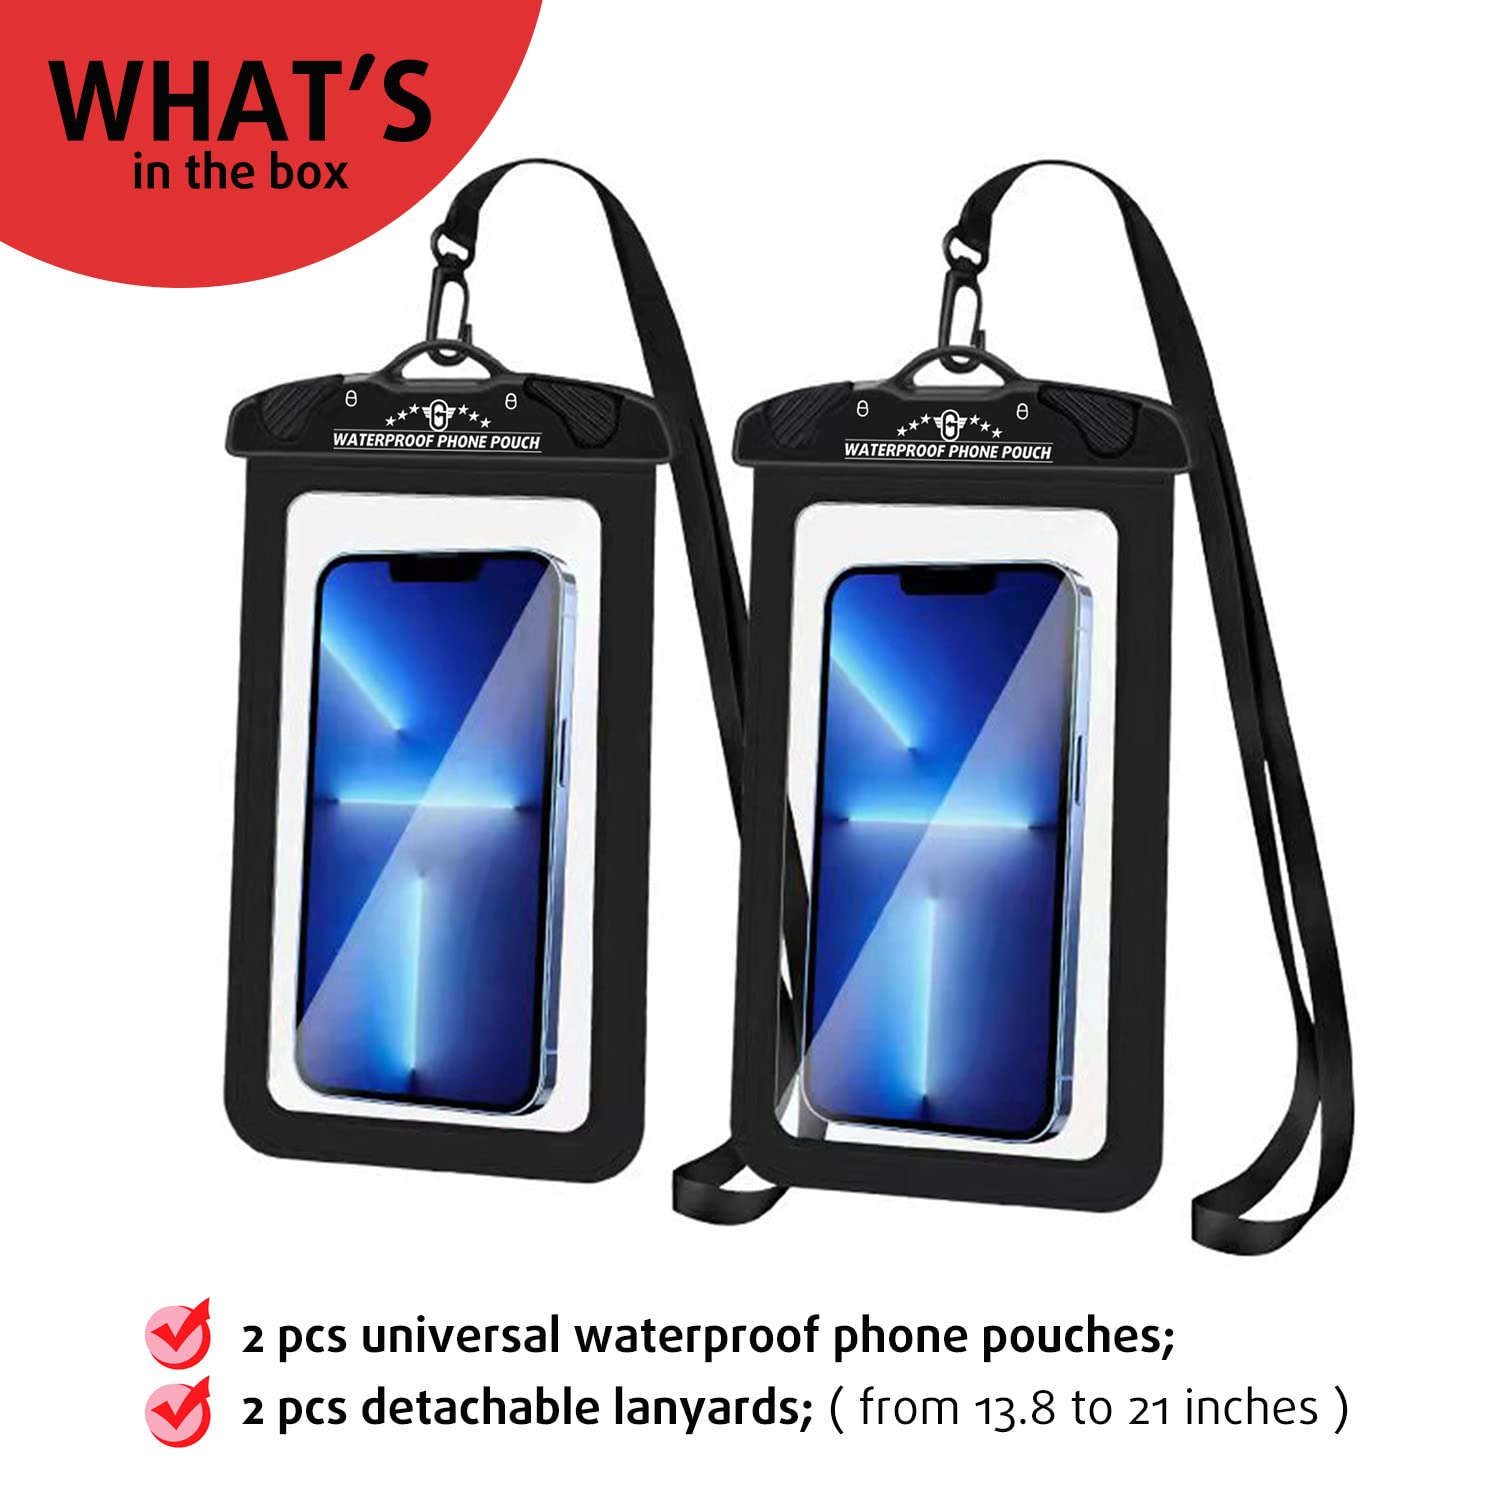 Waterproof Phone Pouch 2 Pack, 100% Waterproof Large Phone Dry Bag for iPhone 14 Pro Max, 13 Pro Max, Samsung Galaxy S23 Ultra, Google Pixel 6 Pixel and Other Phones Black